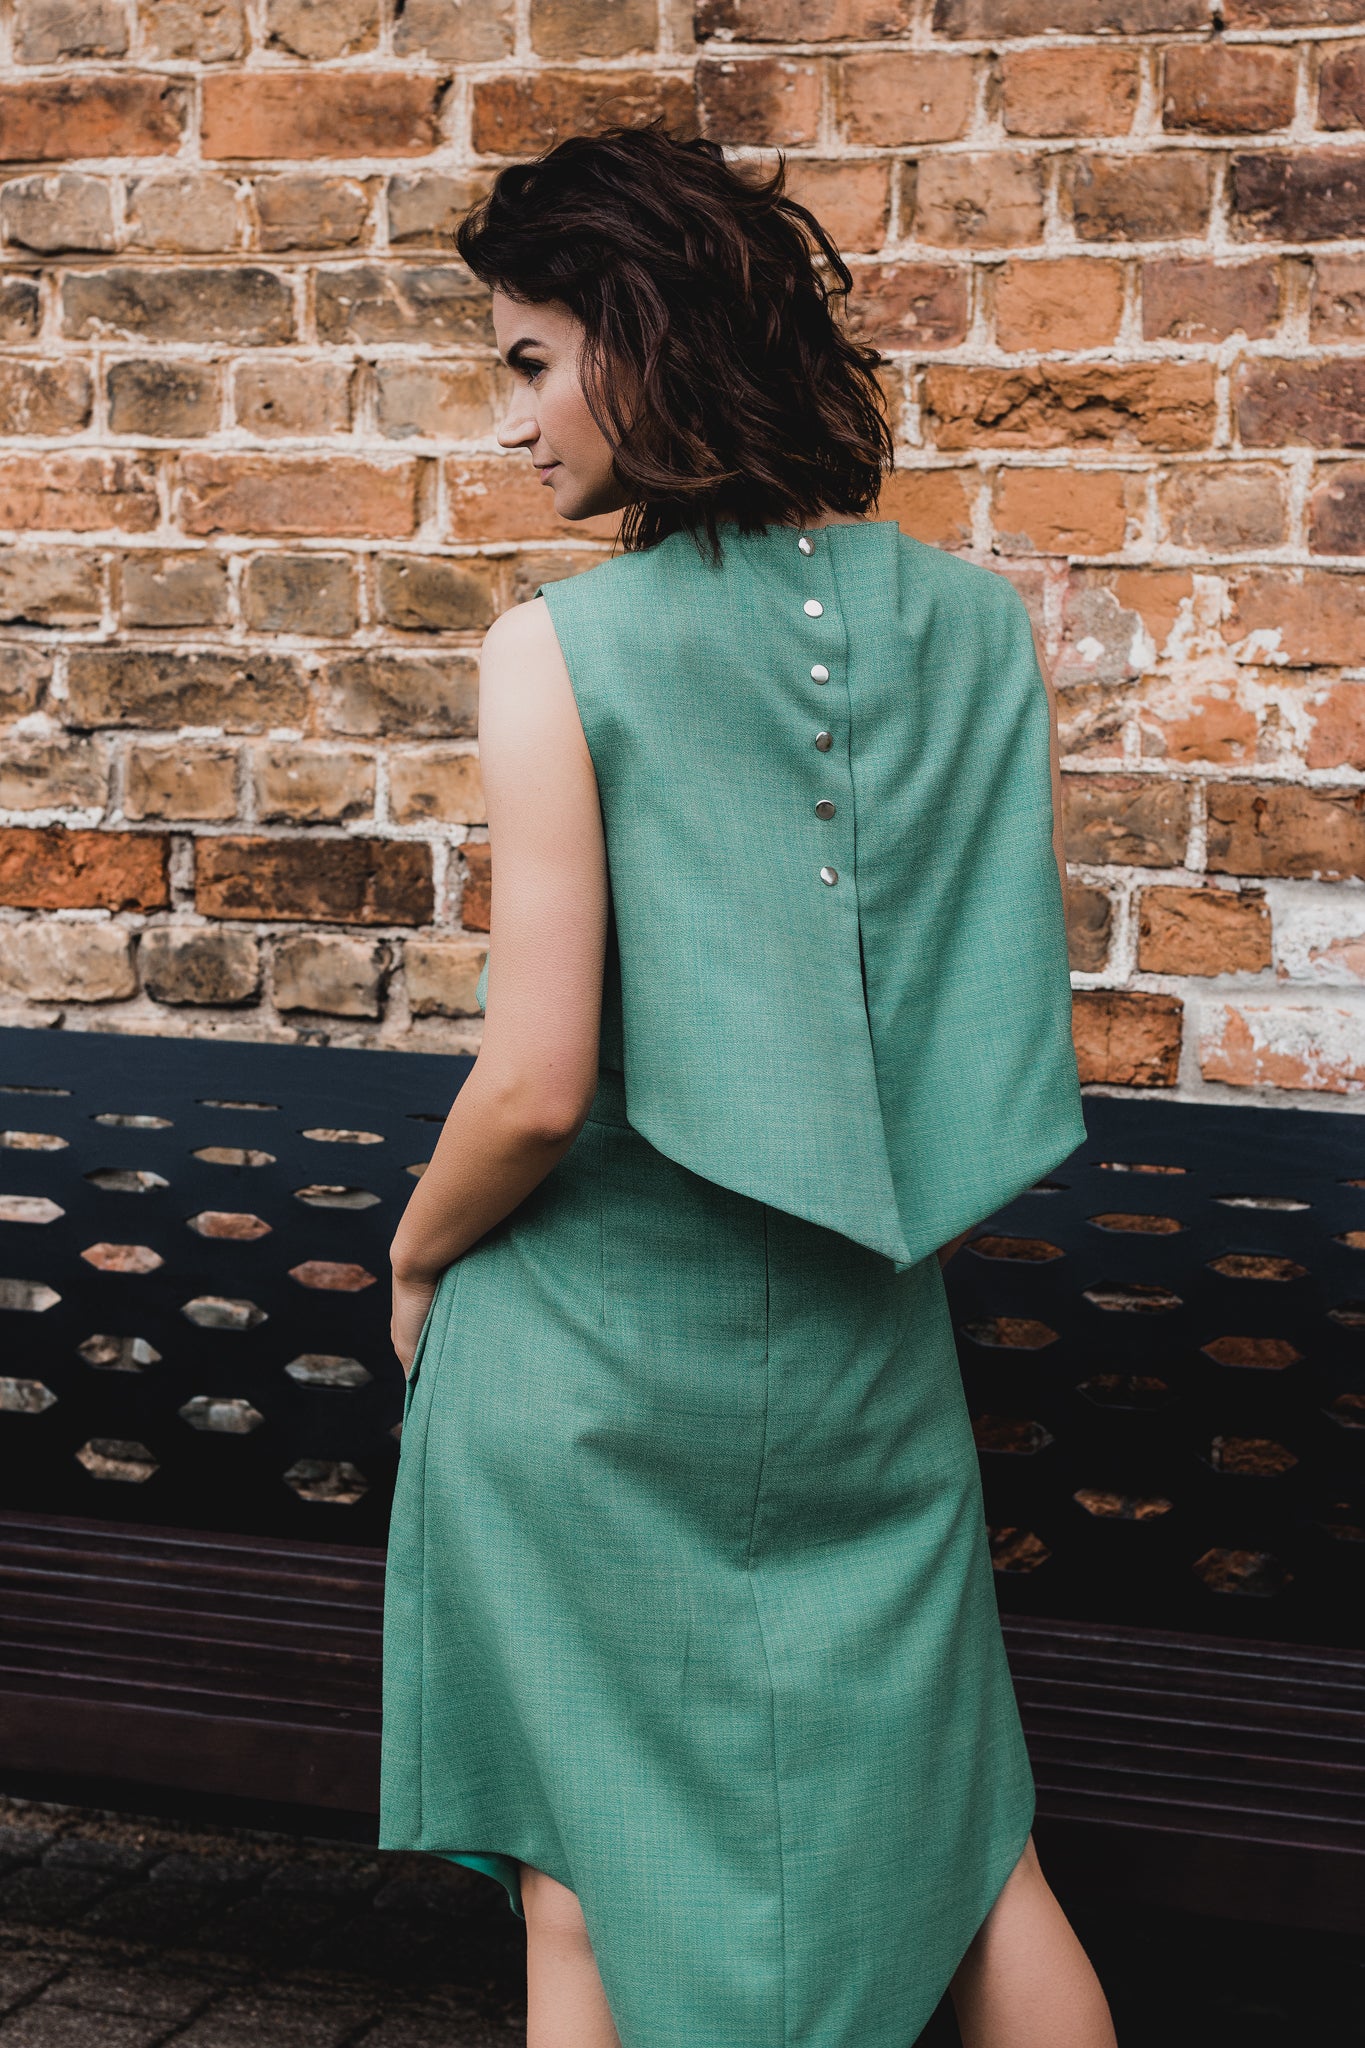 mint green vest or overtop with silver snaps on the back as closure